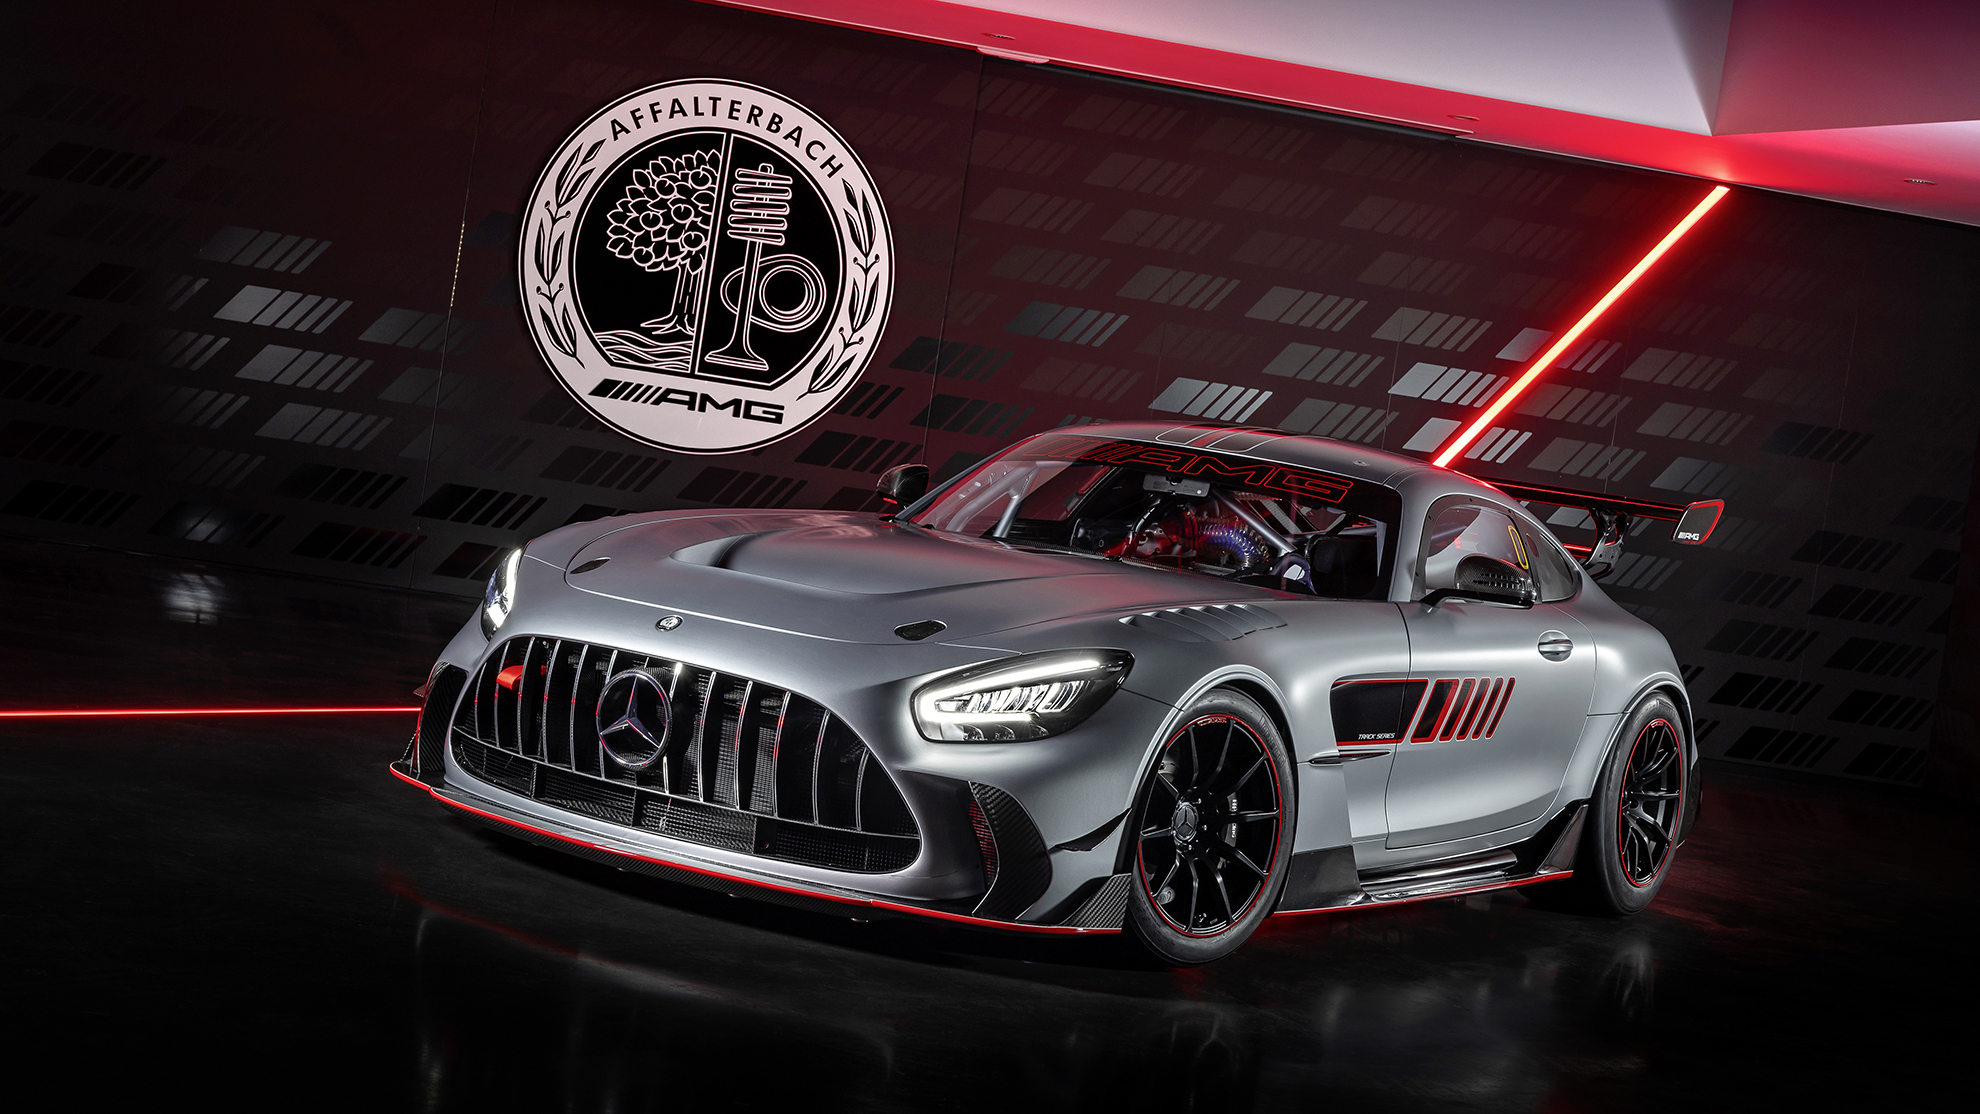 Merceds-AMG GT Track Series - exclusivo - 55 unidades - serie limitada - Black Series - GT3 - GT4 - Black Series